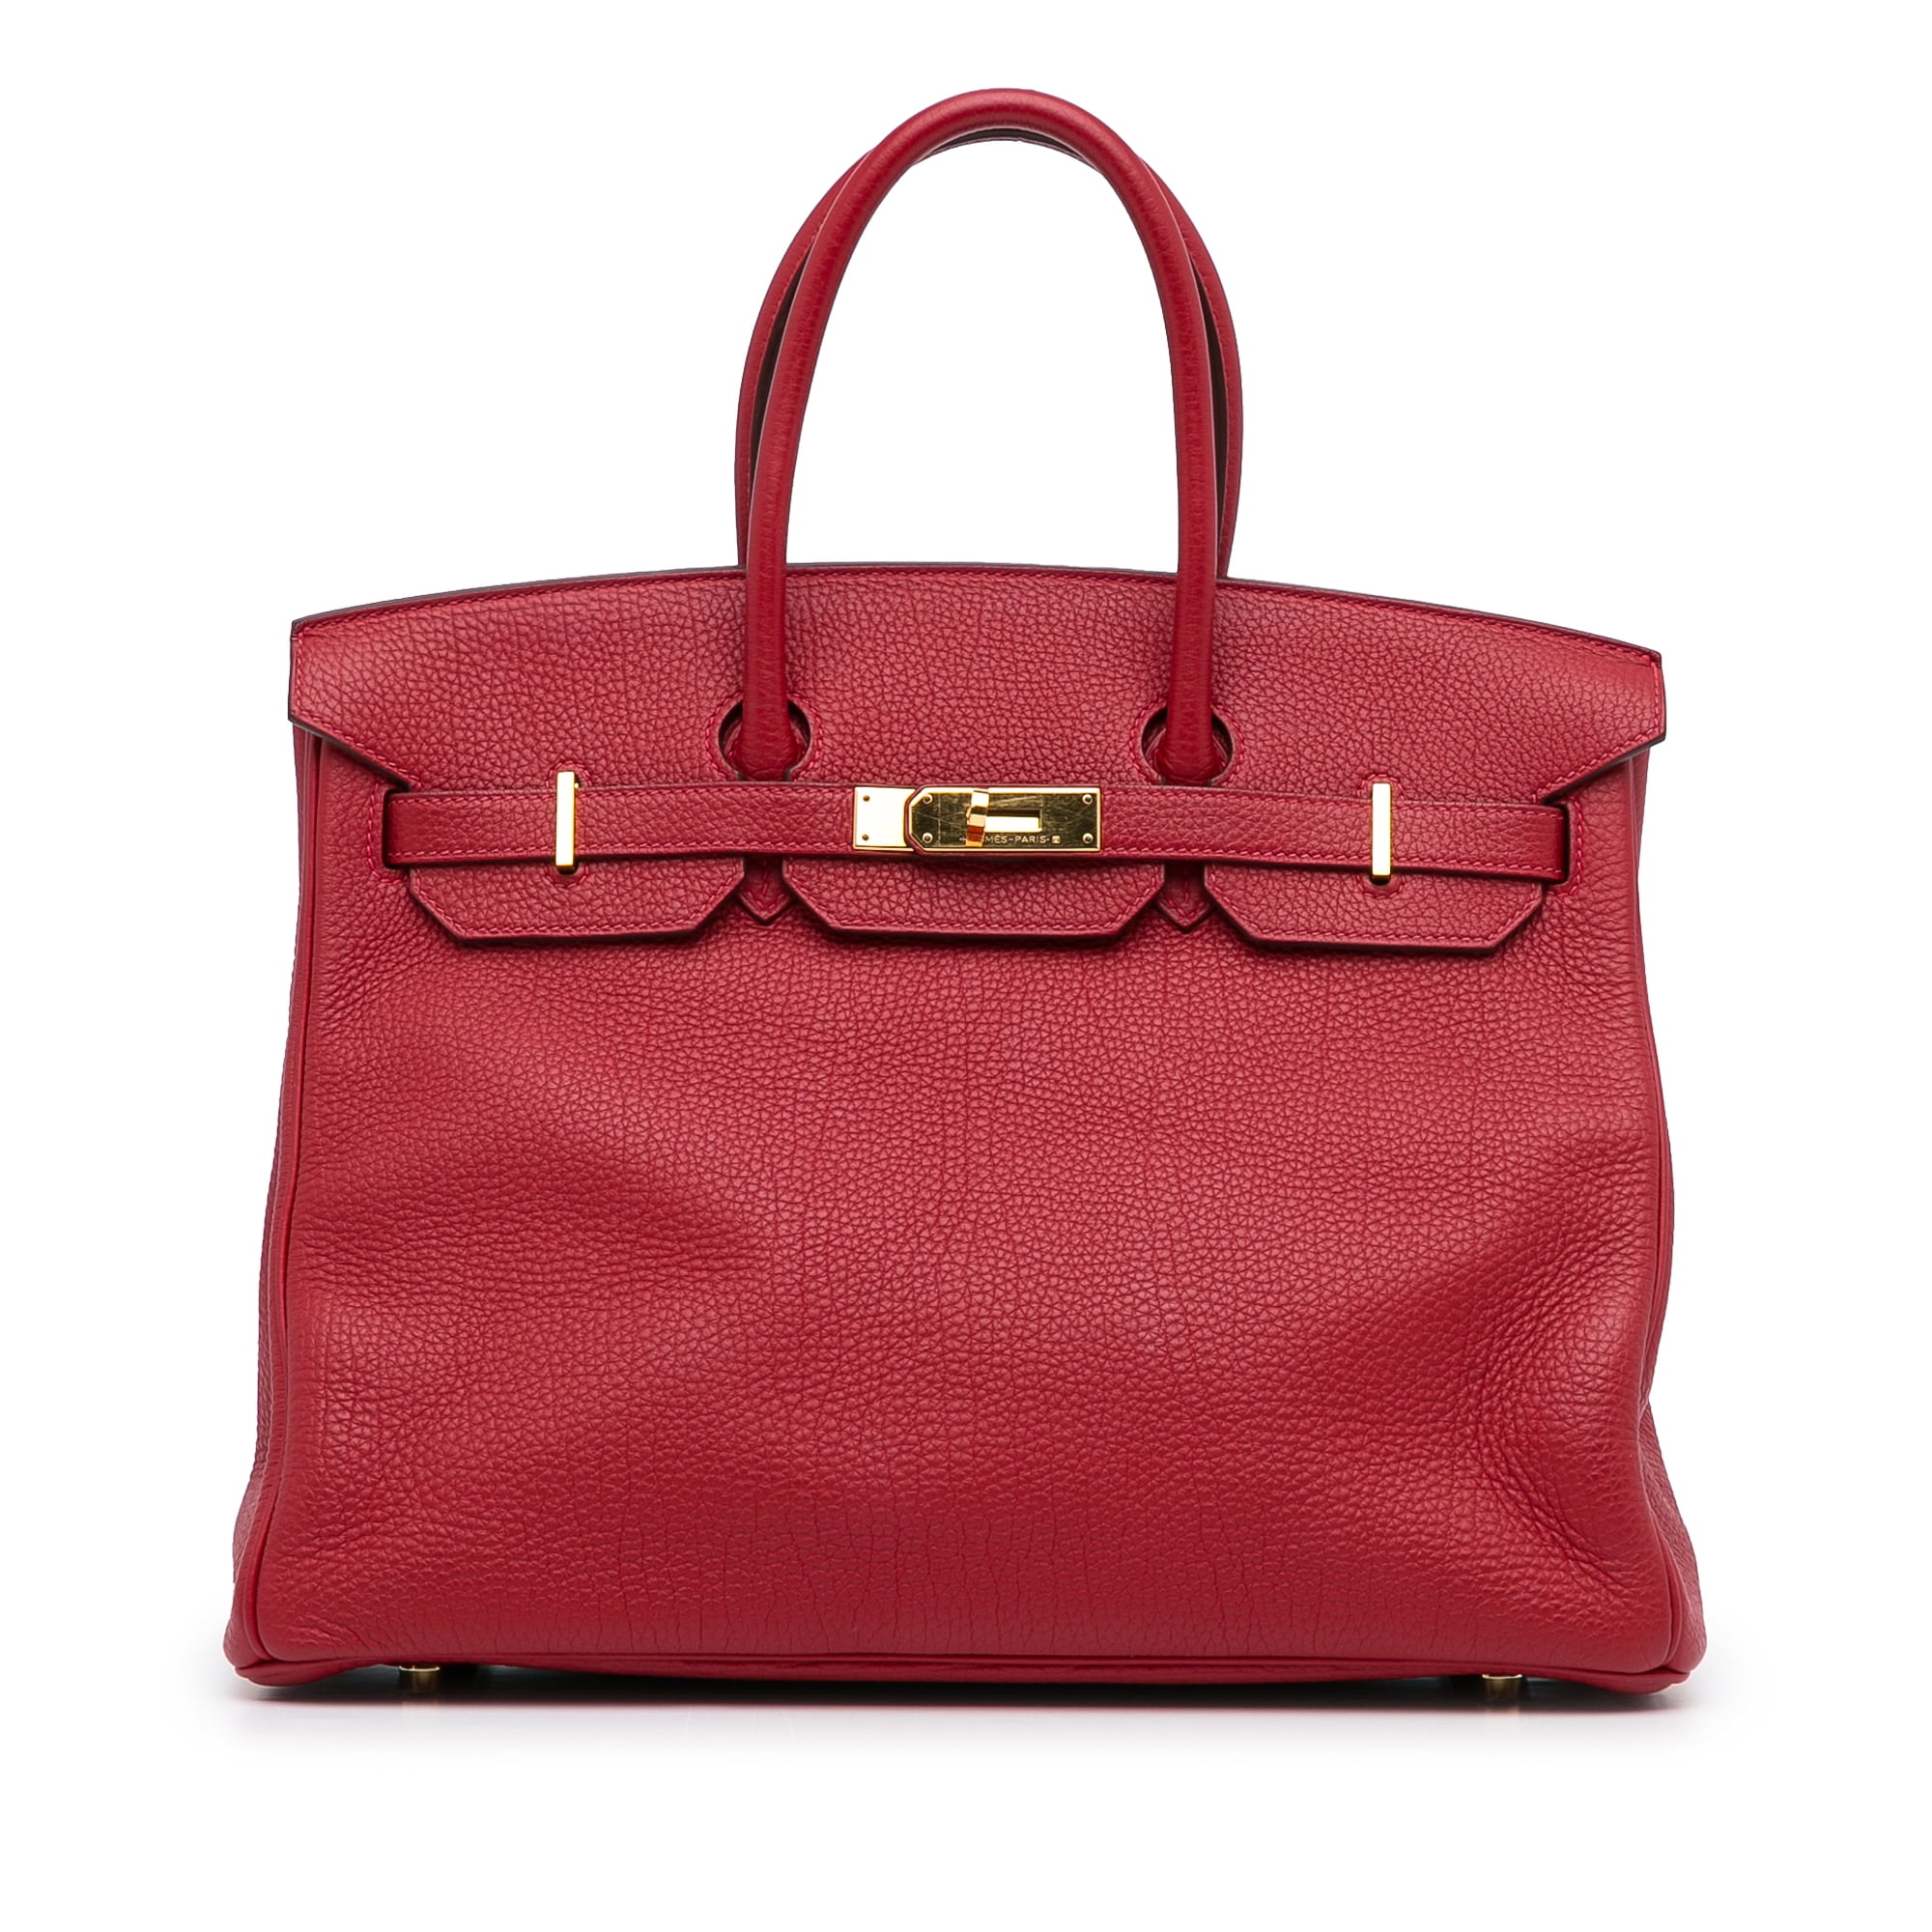 Unisex Pre-Owned Authenticated Hermes Togo Birkin 35 Calf Leather Red ...